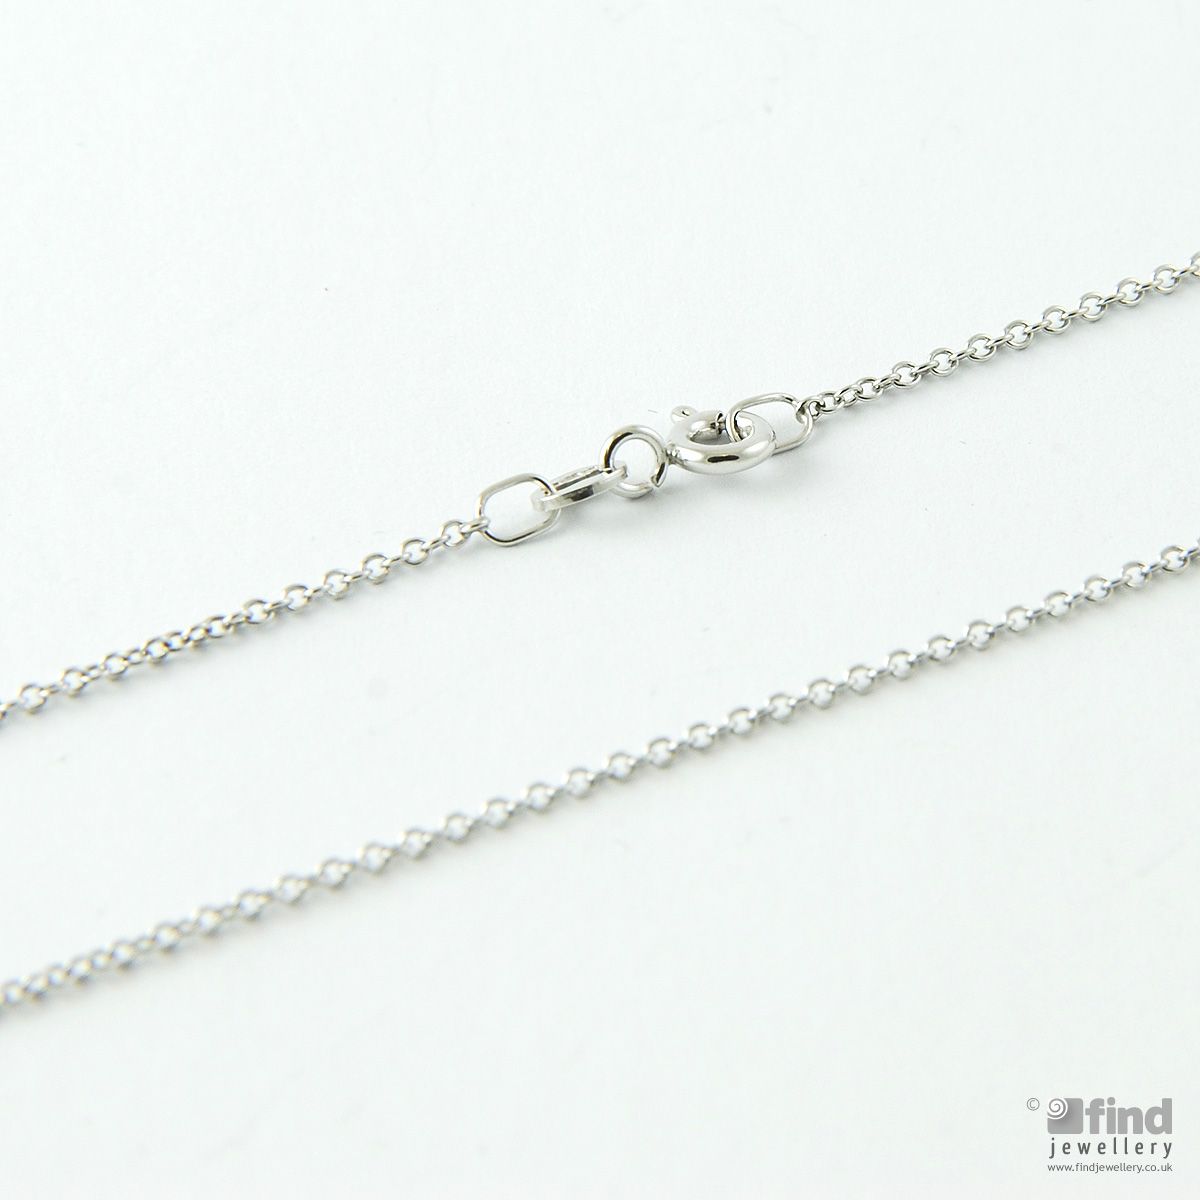 Unbranded 9ct White Gold 16 inch Trace Chain